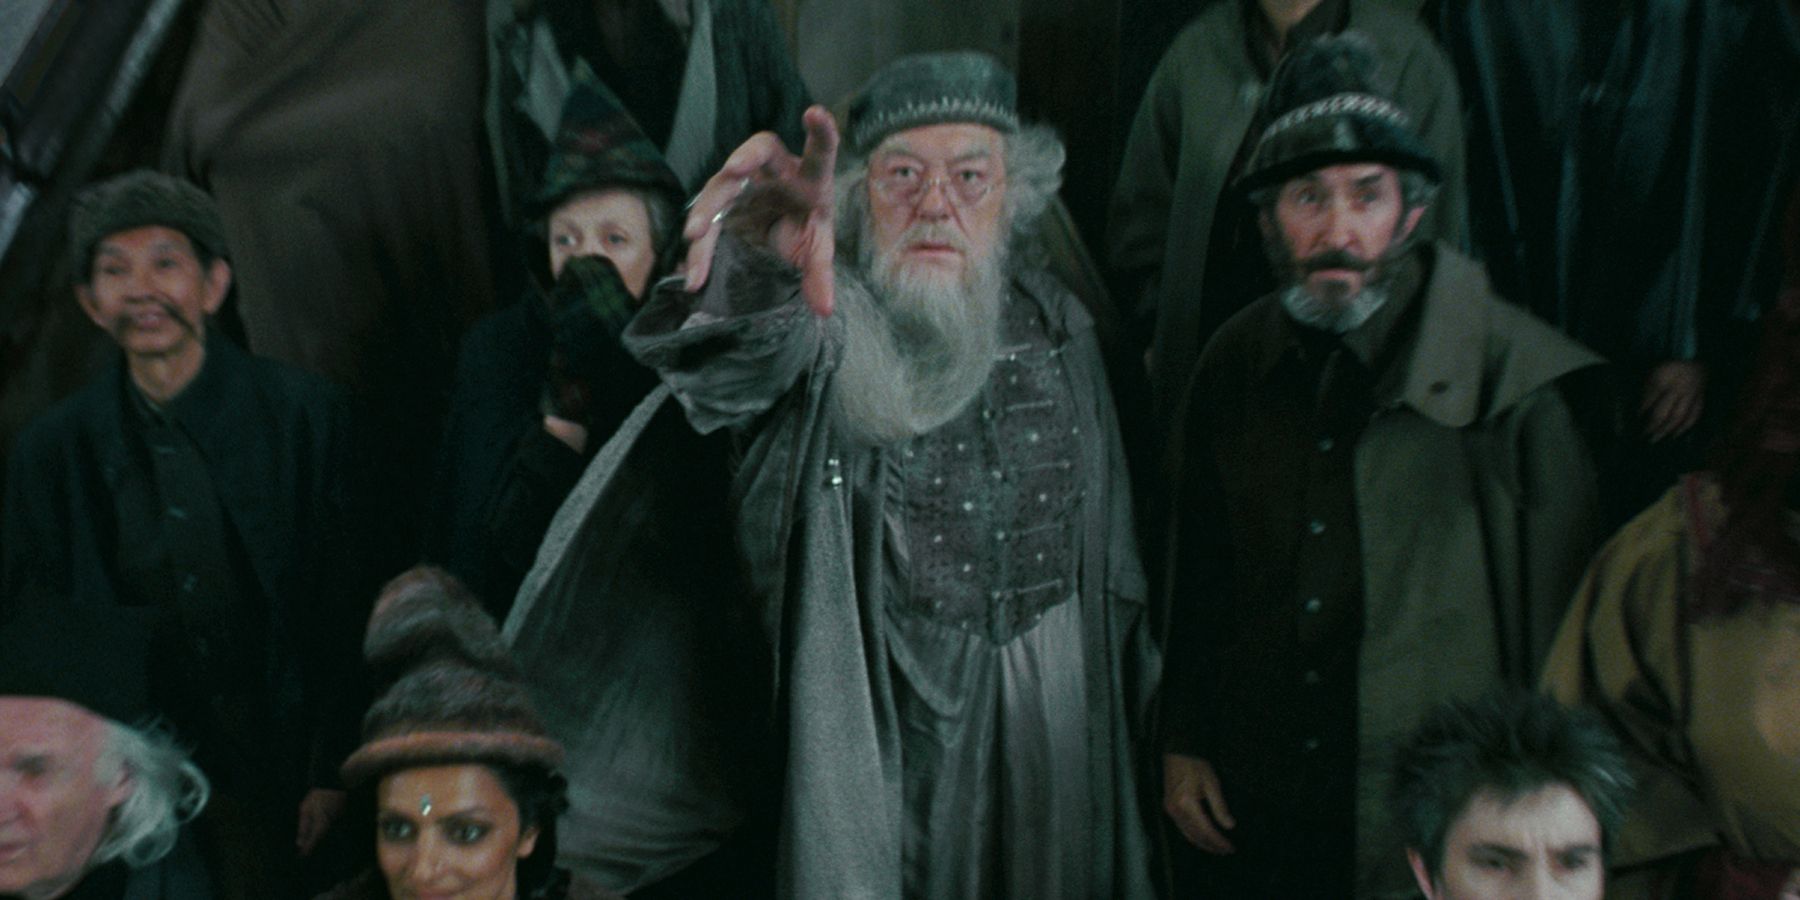 Albus Dumbledore casts Arresto Momentum to stop Harry falling to the ground at a quidditch match